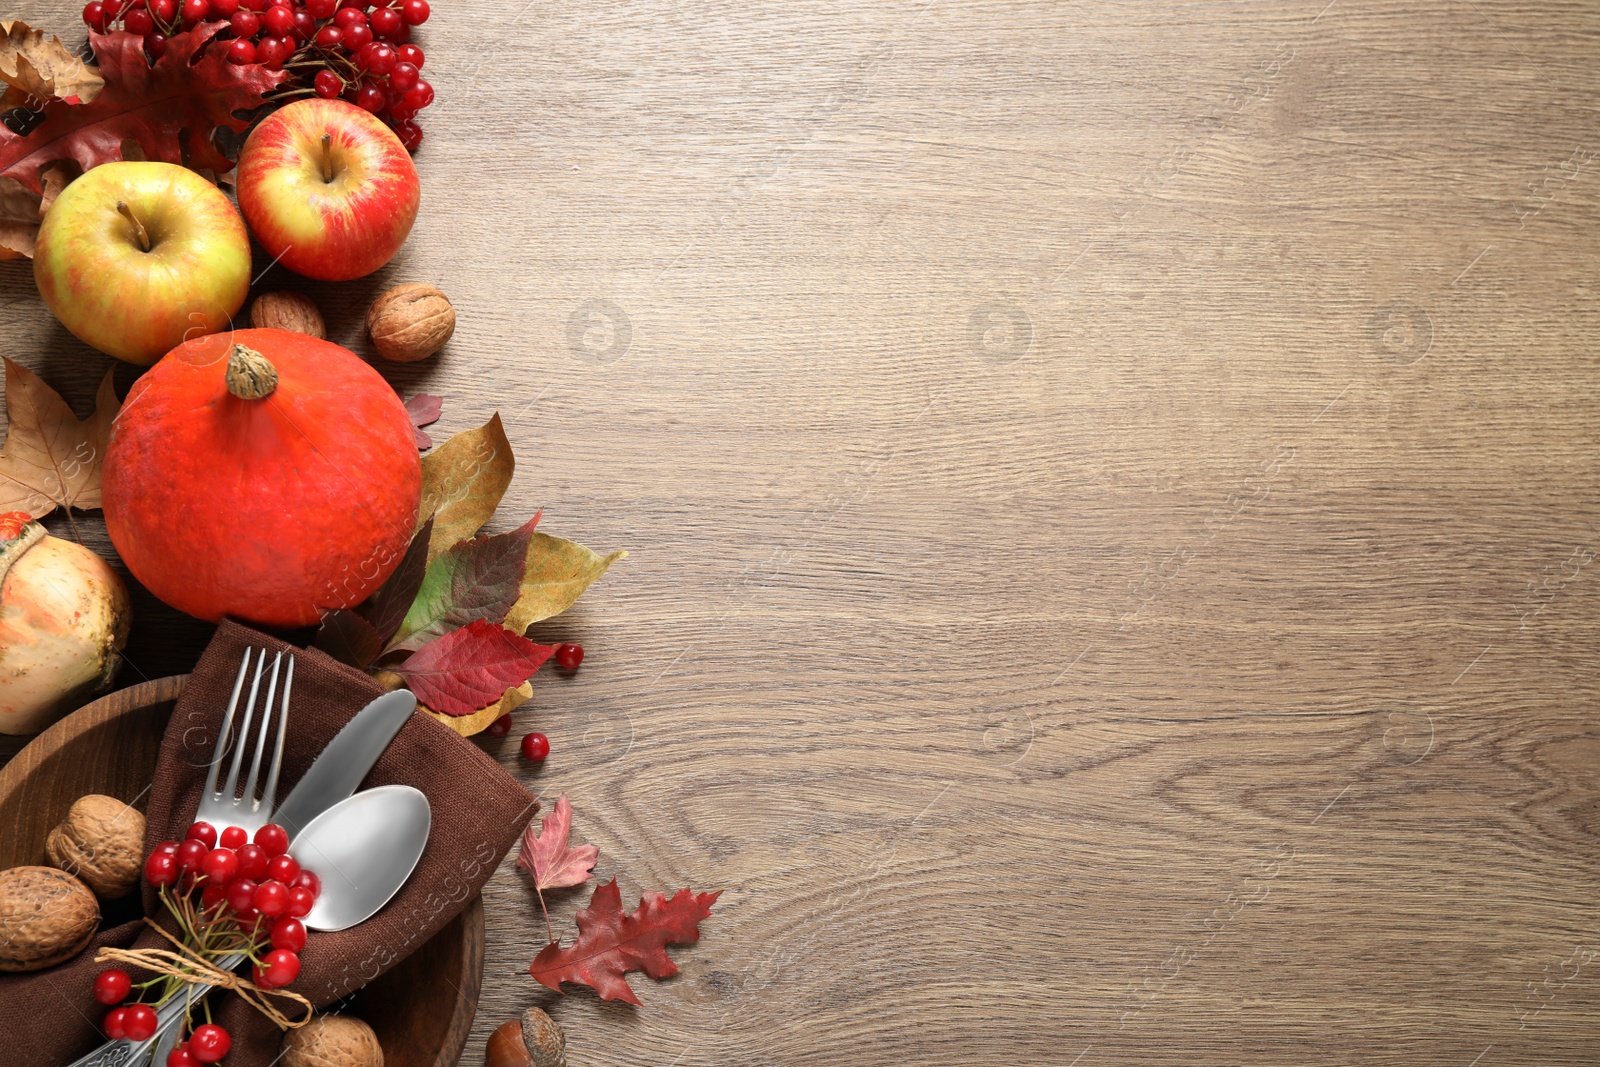 Photo of Autumn vegetables, fruits and cutlery on wooden background, flat lay with space for text. Happy Thanksgiving day